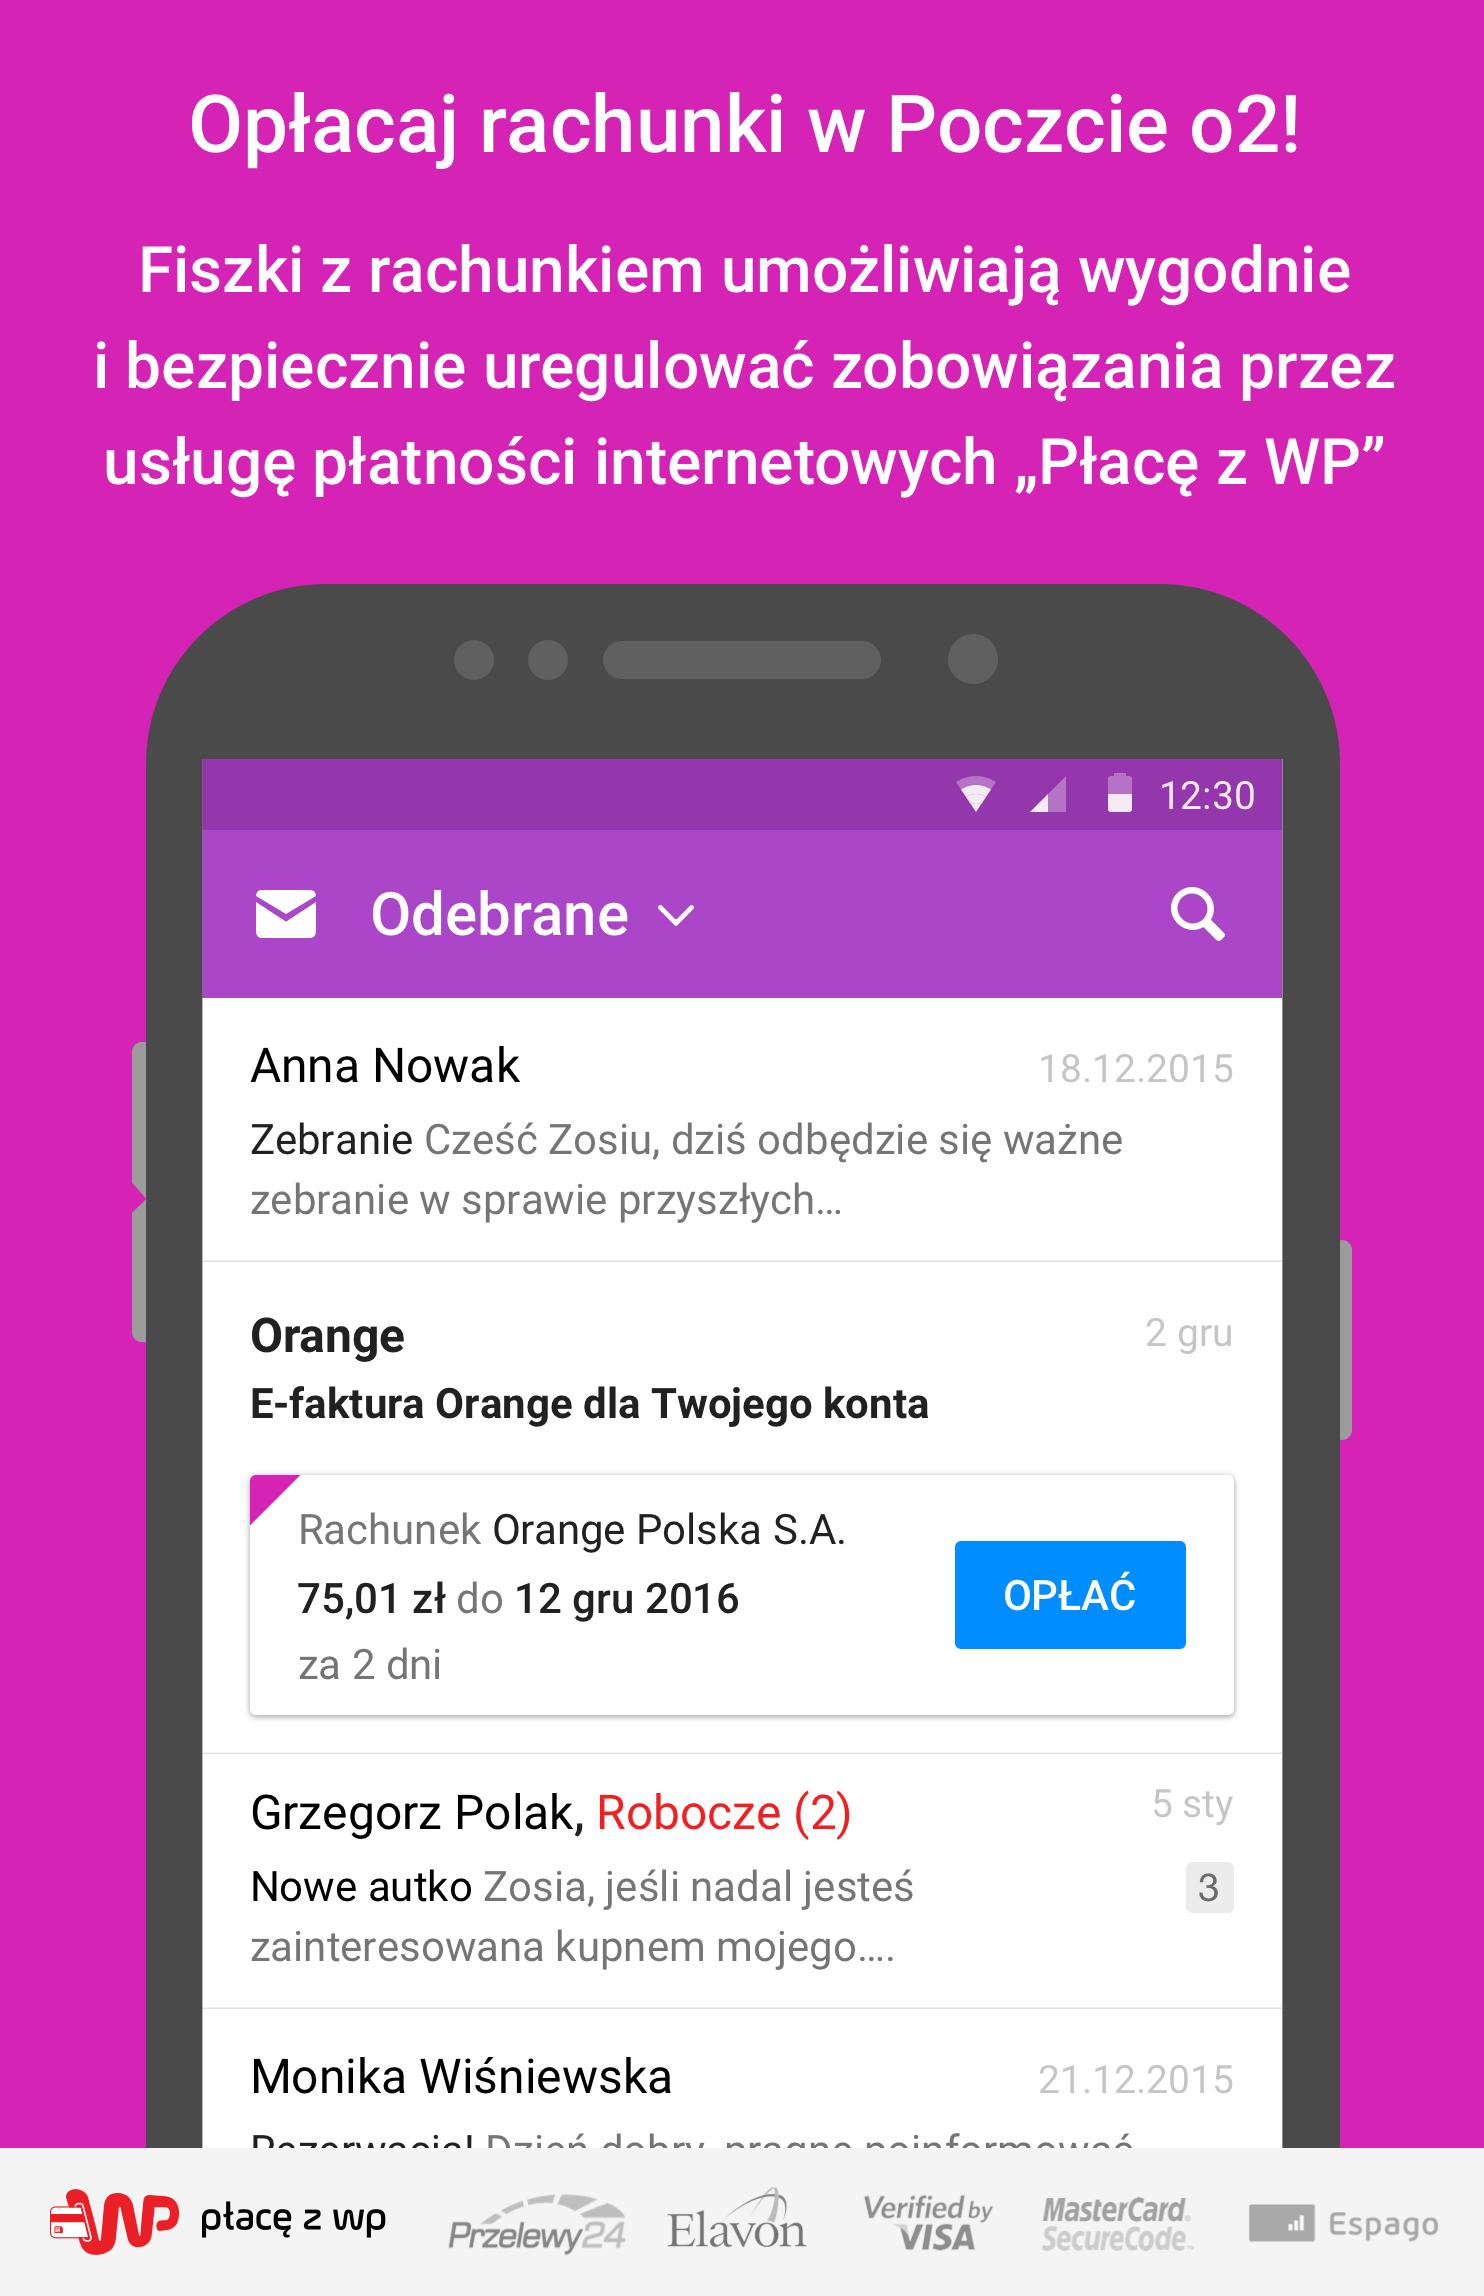 Poczta o2 for Android - APK Download